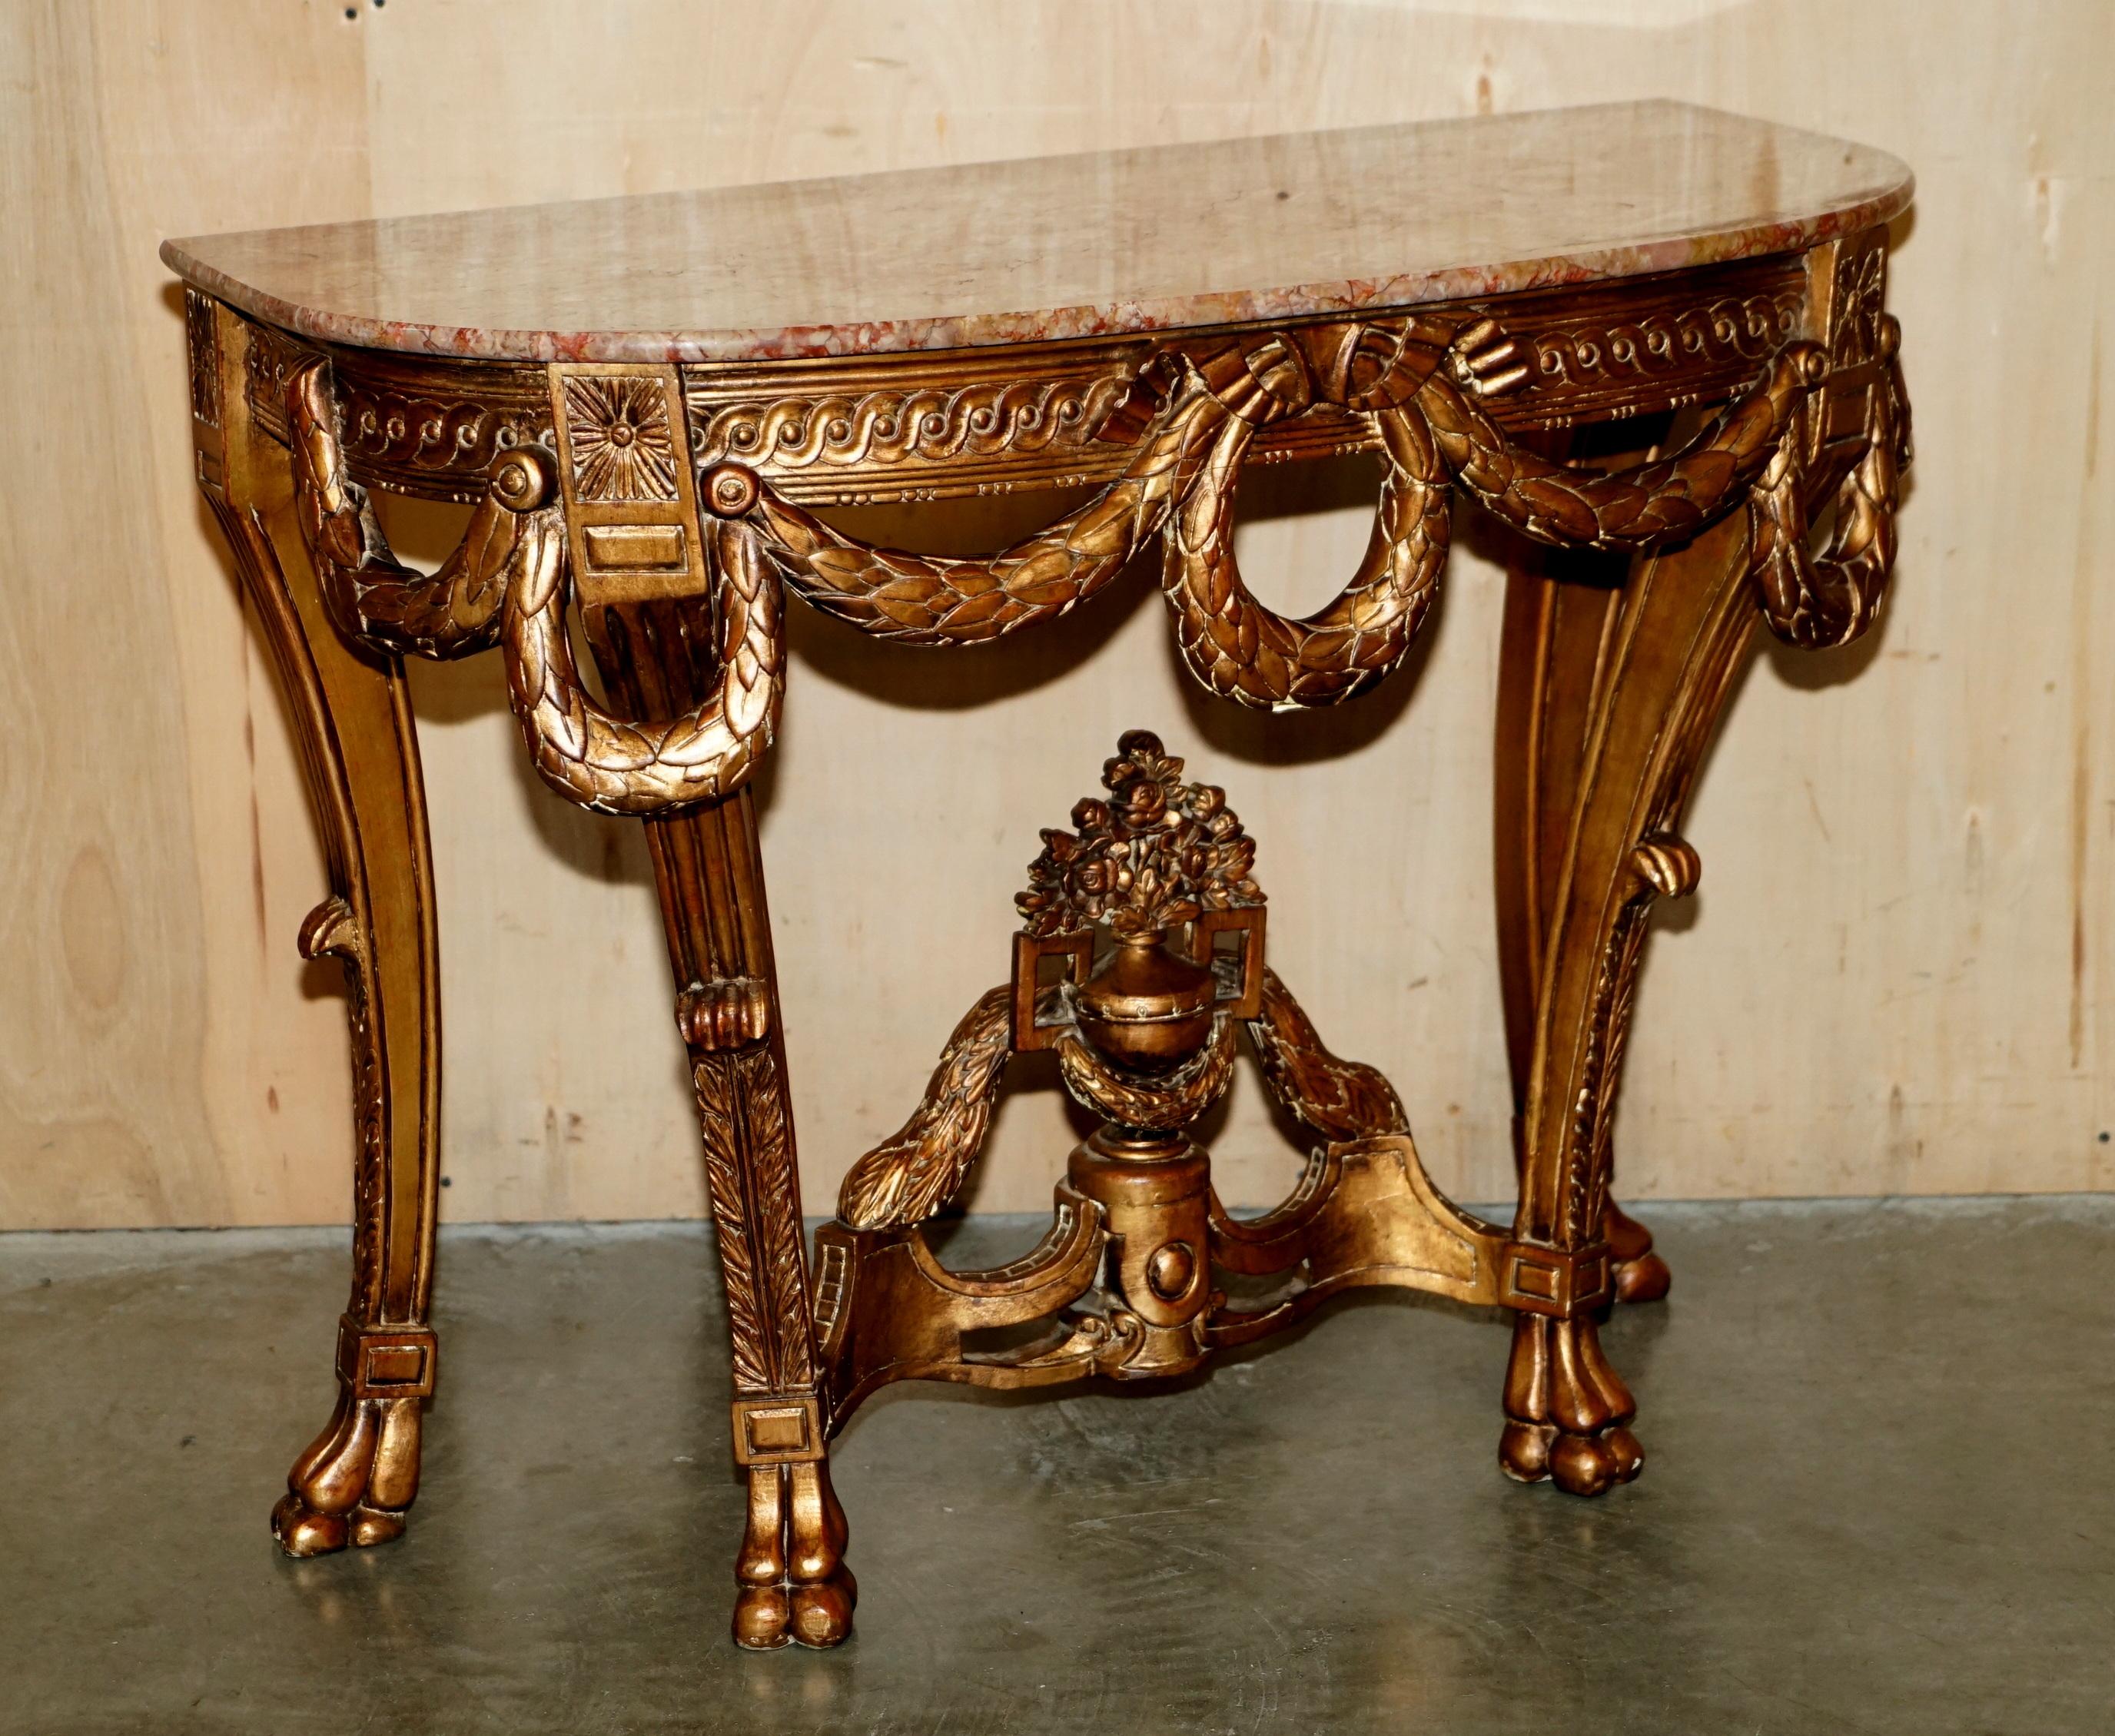 Royal House Antiques

Royal House Antiques is delighted to offer for sale this lovely Italian Giltwood with marble top Demi Lune console table made in Venice

Please note the delivery fee listed is just a guide, it covers within the M25 only for the